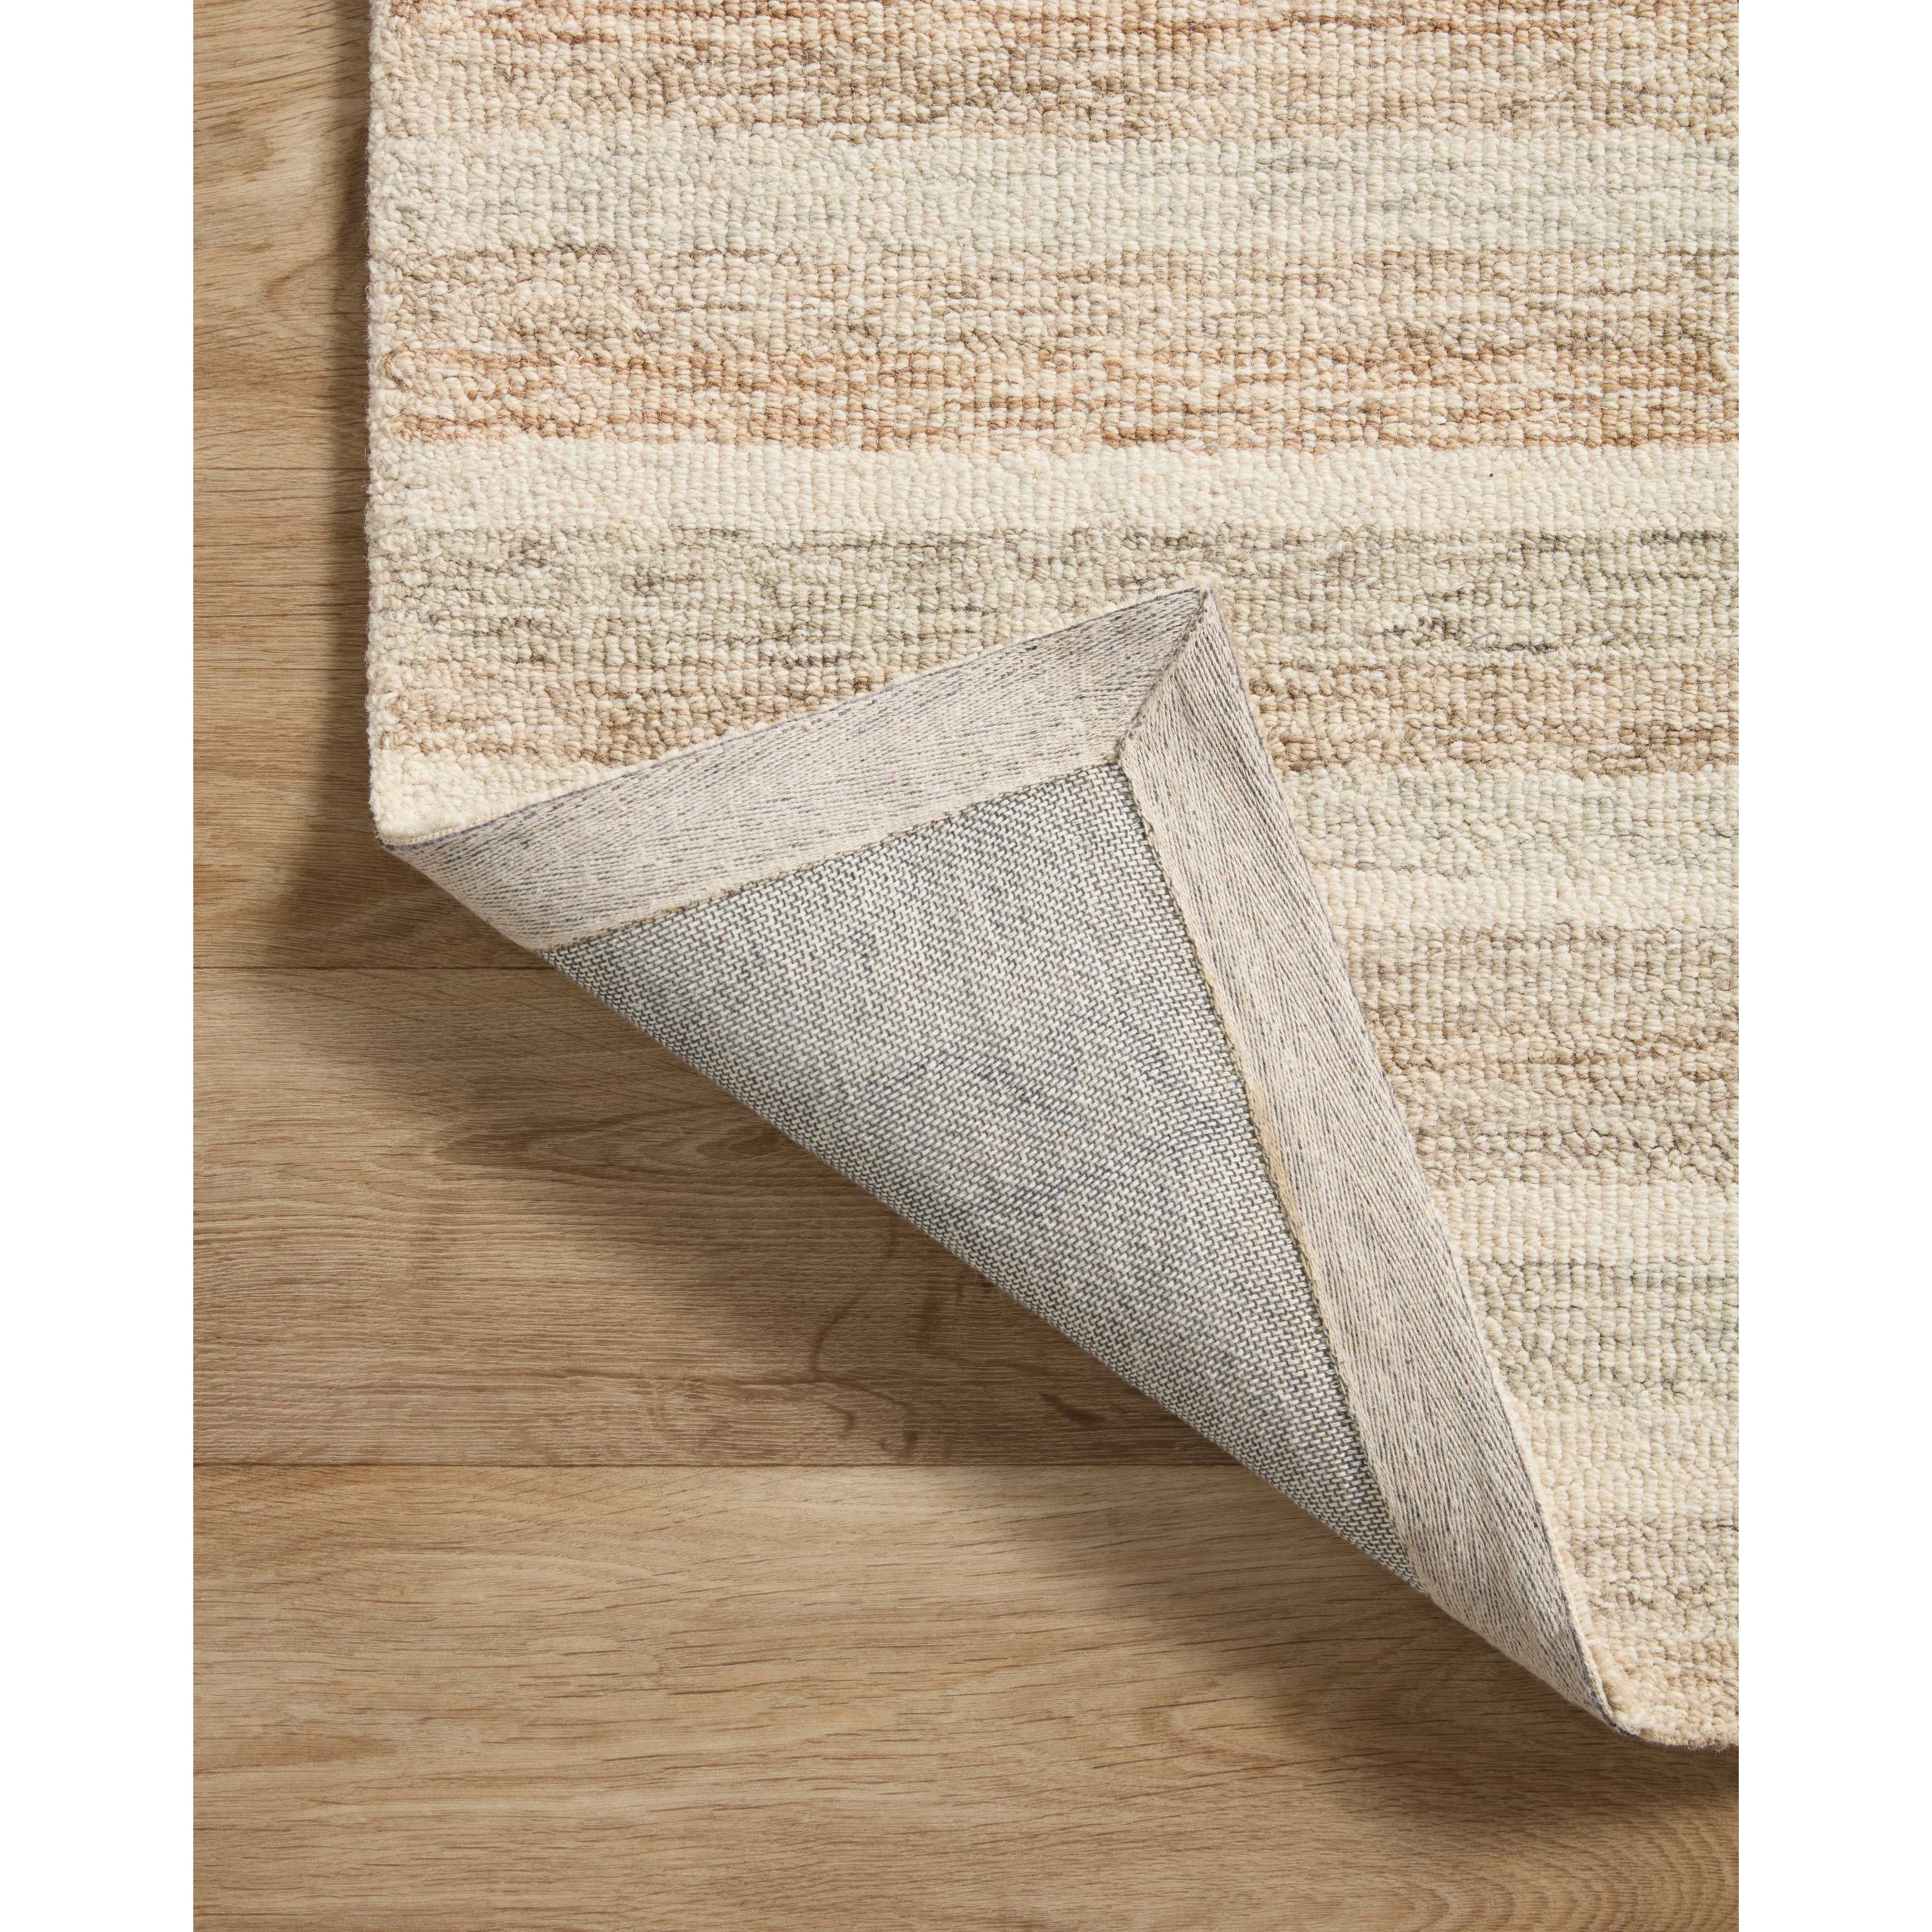 The subtle, warm tonal patterns remind us of our favorite California cool hemp rugs. Known for its durability, the Chris Ivory / Clay hooked wool rug is a smart choice for any room in your home that gets lots of love. Amethyst Home provides interior design services, furniture, rugs, and lighting in the Monterey metro area.